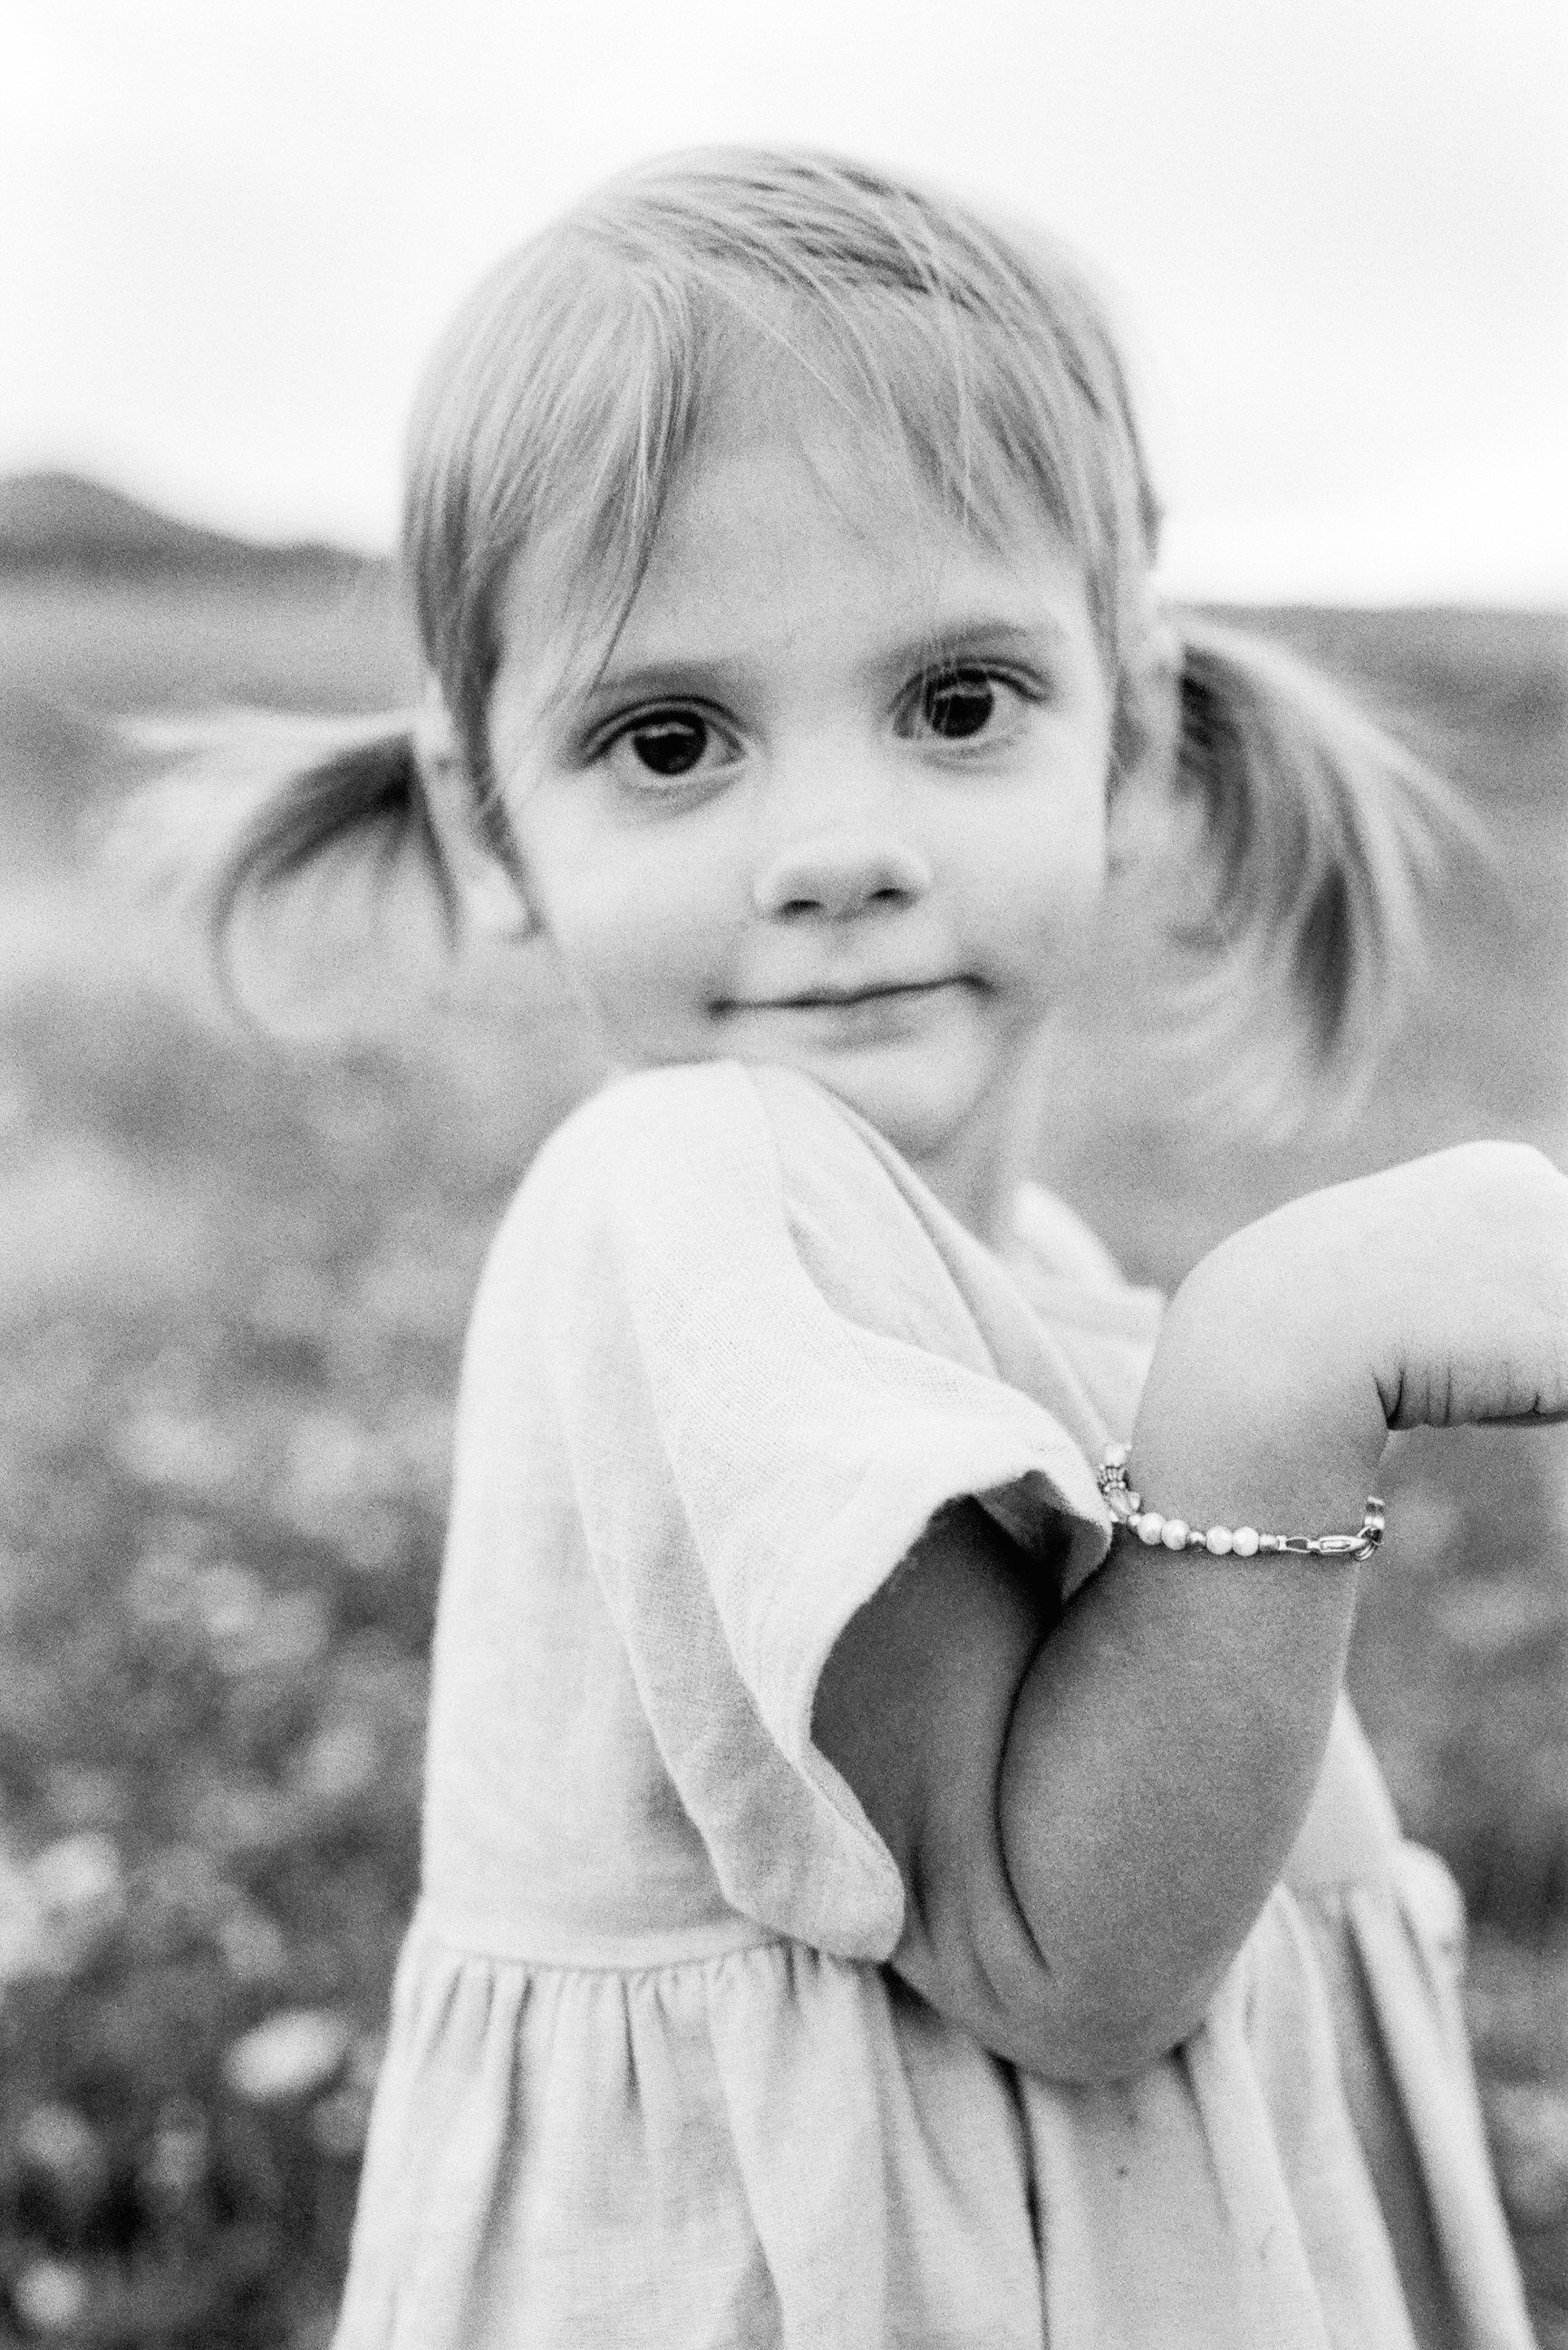 little girl with pigtails looking at camera